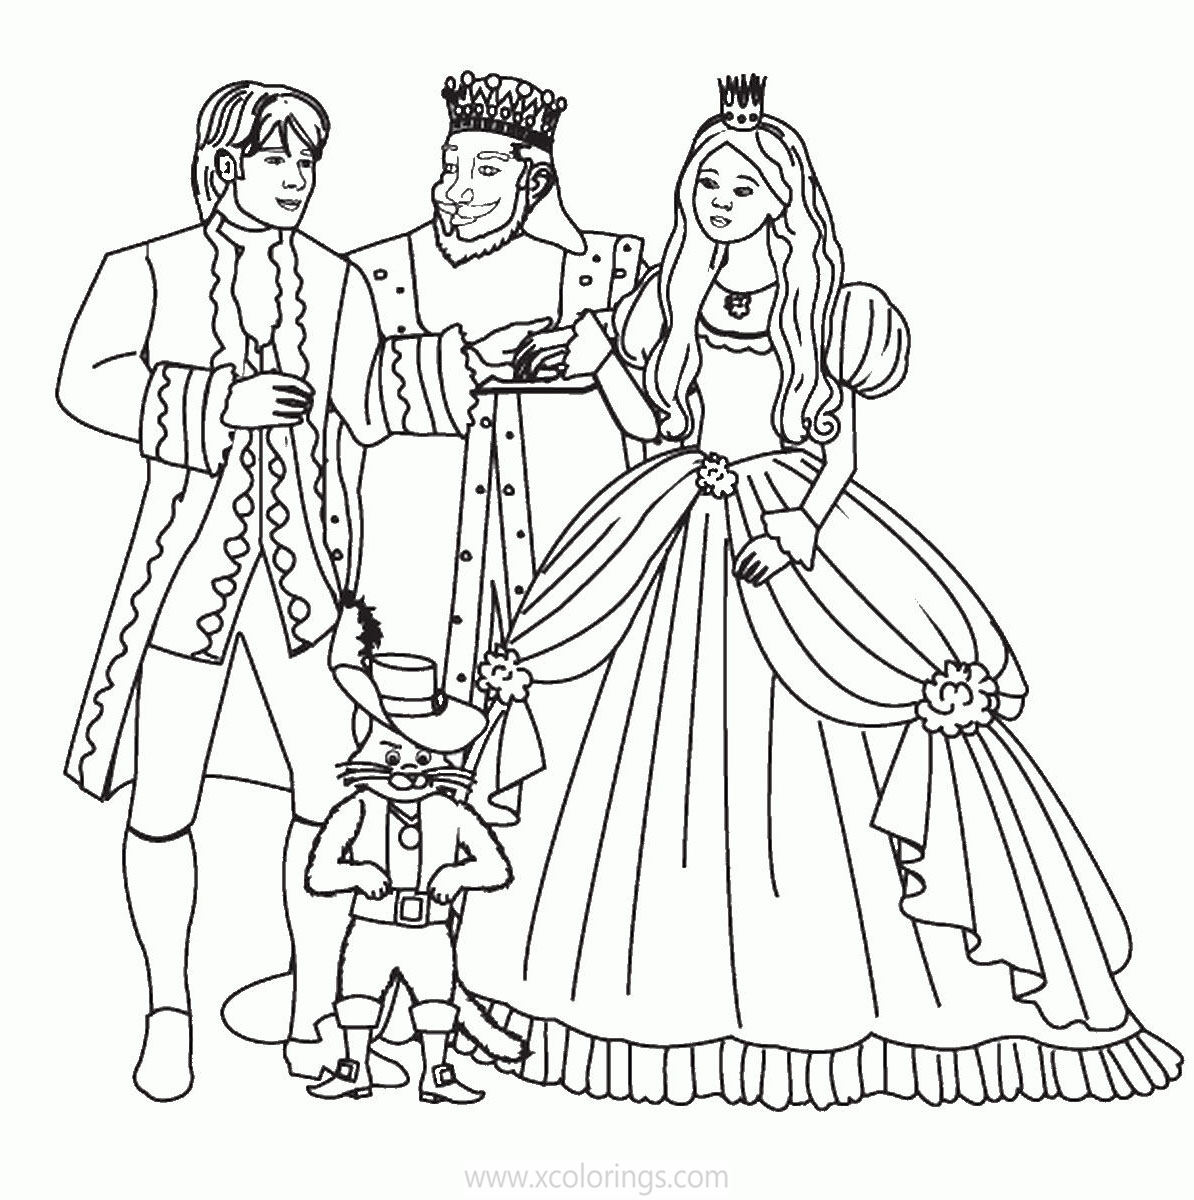 Free Puss in Boots Coloring Pages with King Prince and Princess printable